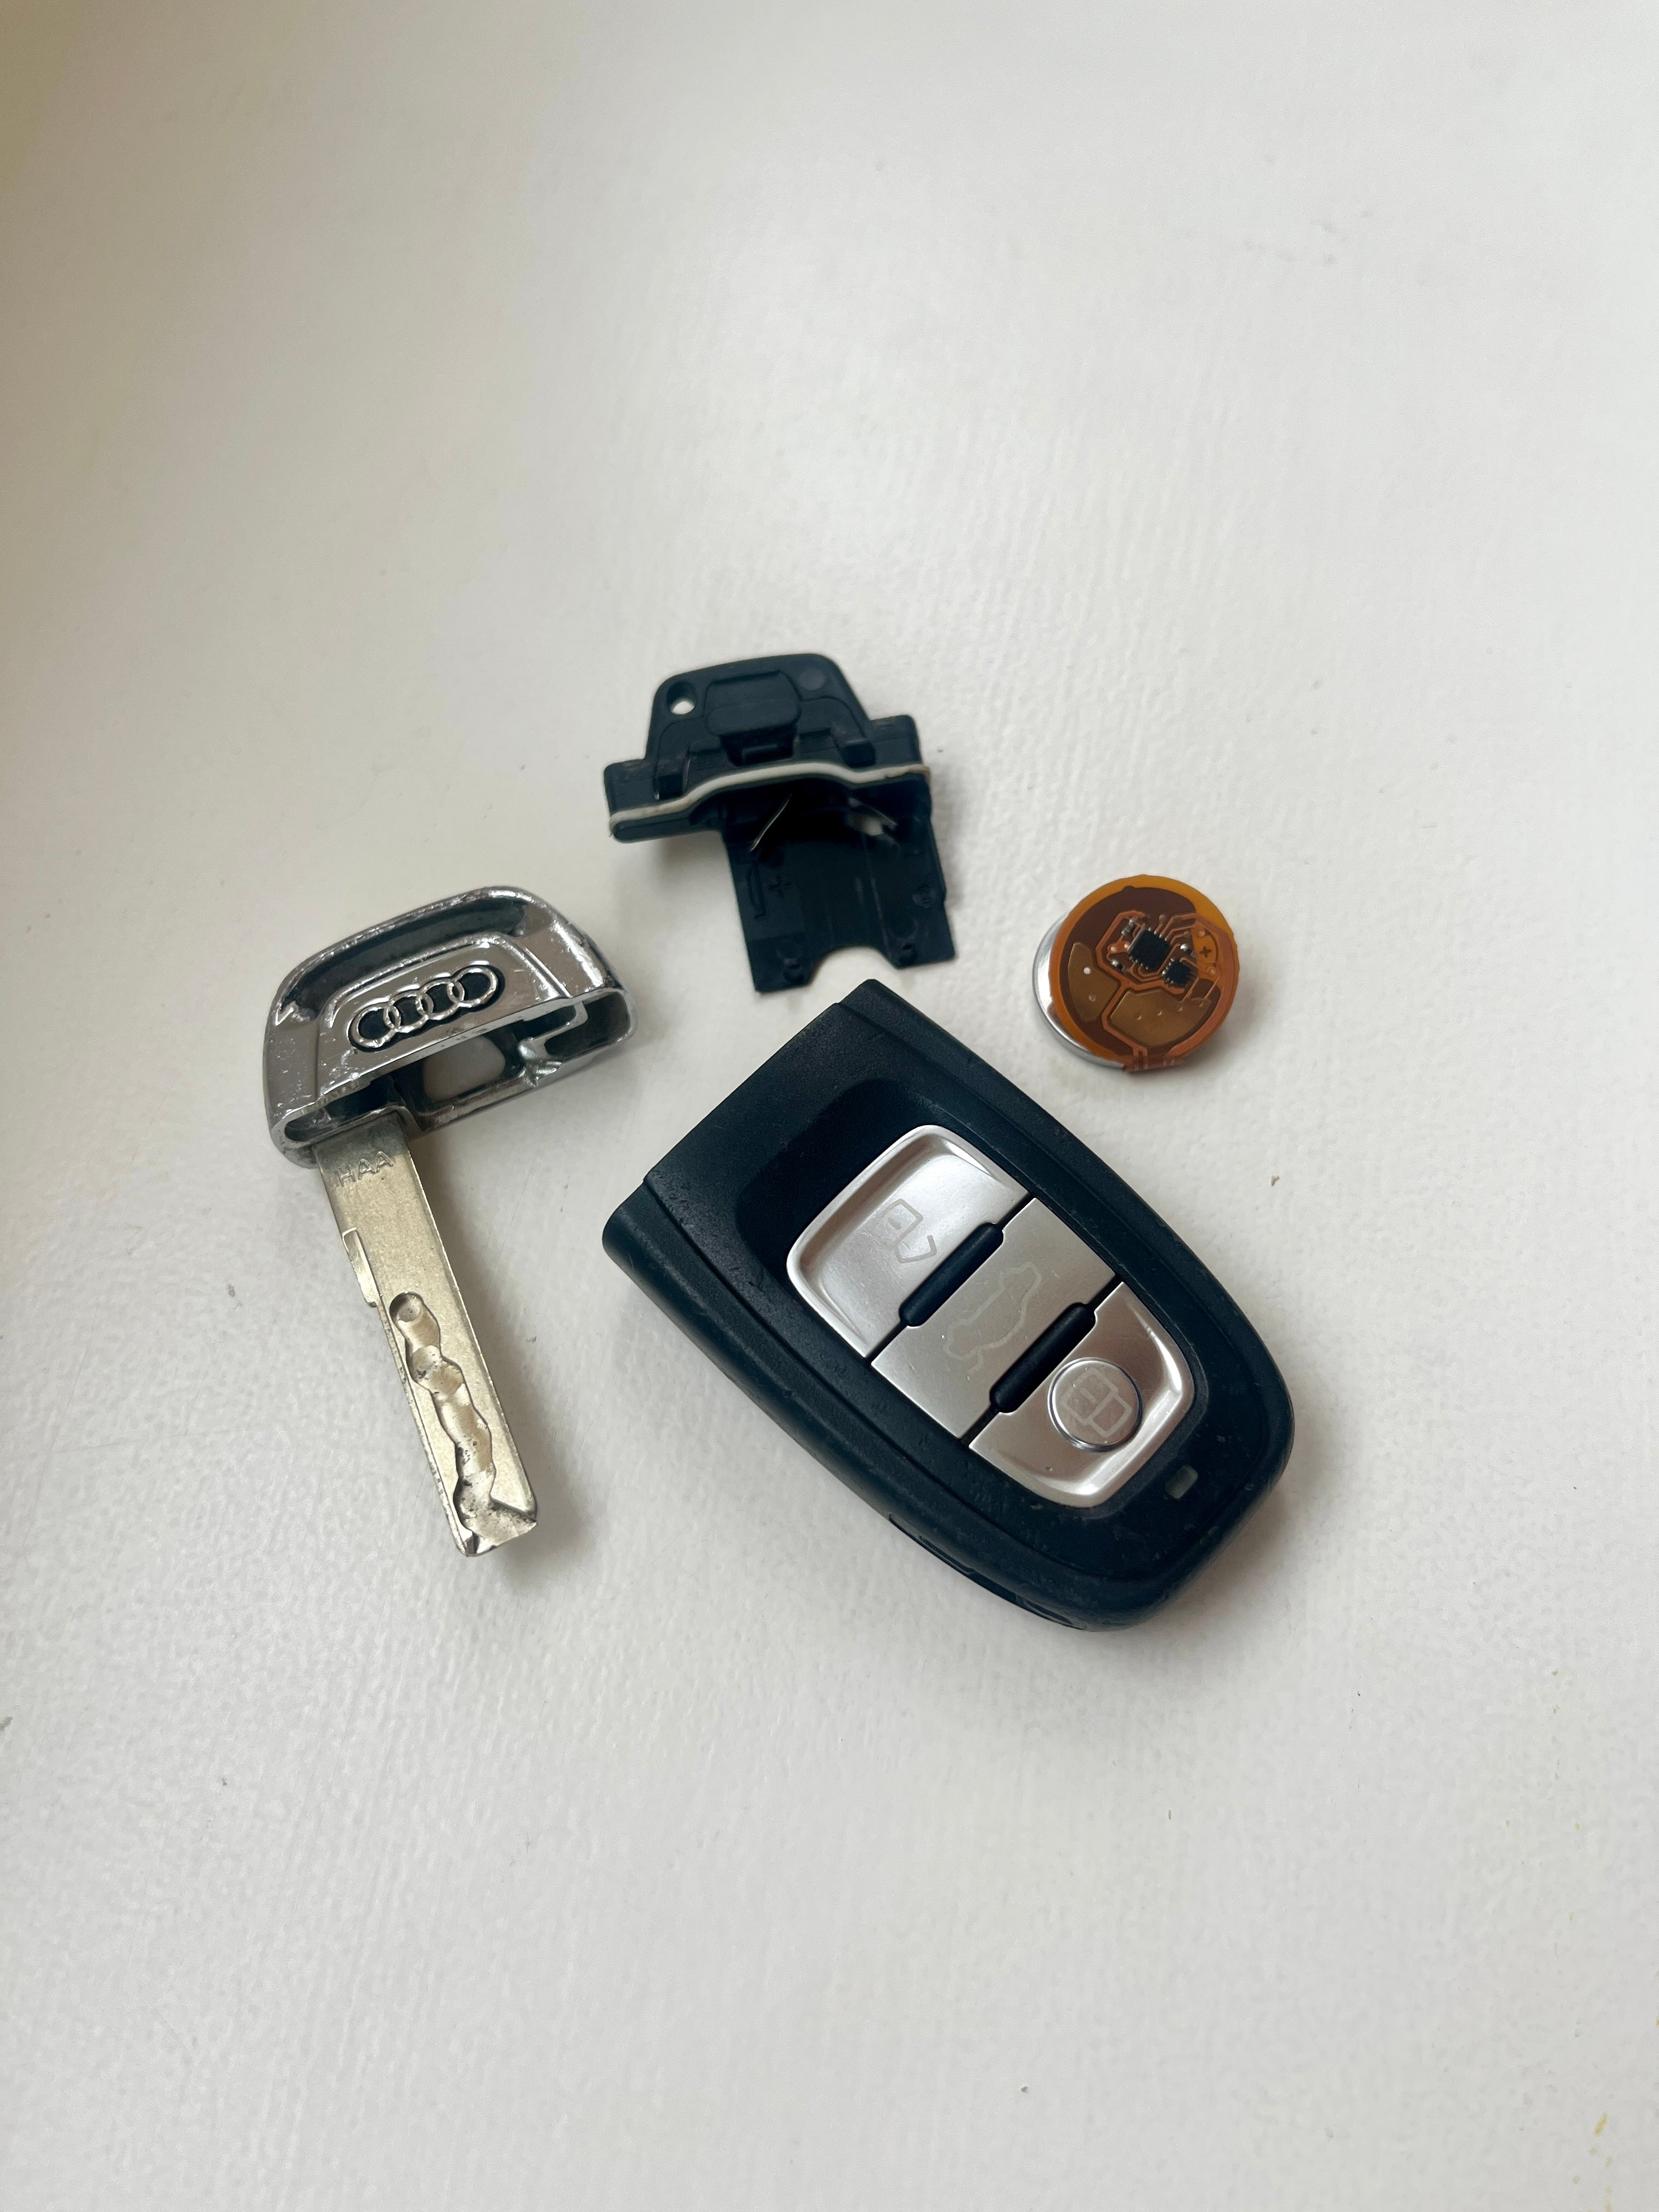 Audi car key with KEYSHIELD anti-theft security sleeve installed to prevent stolen car